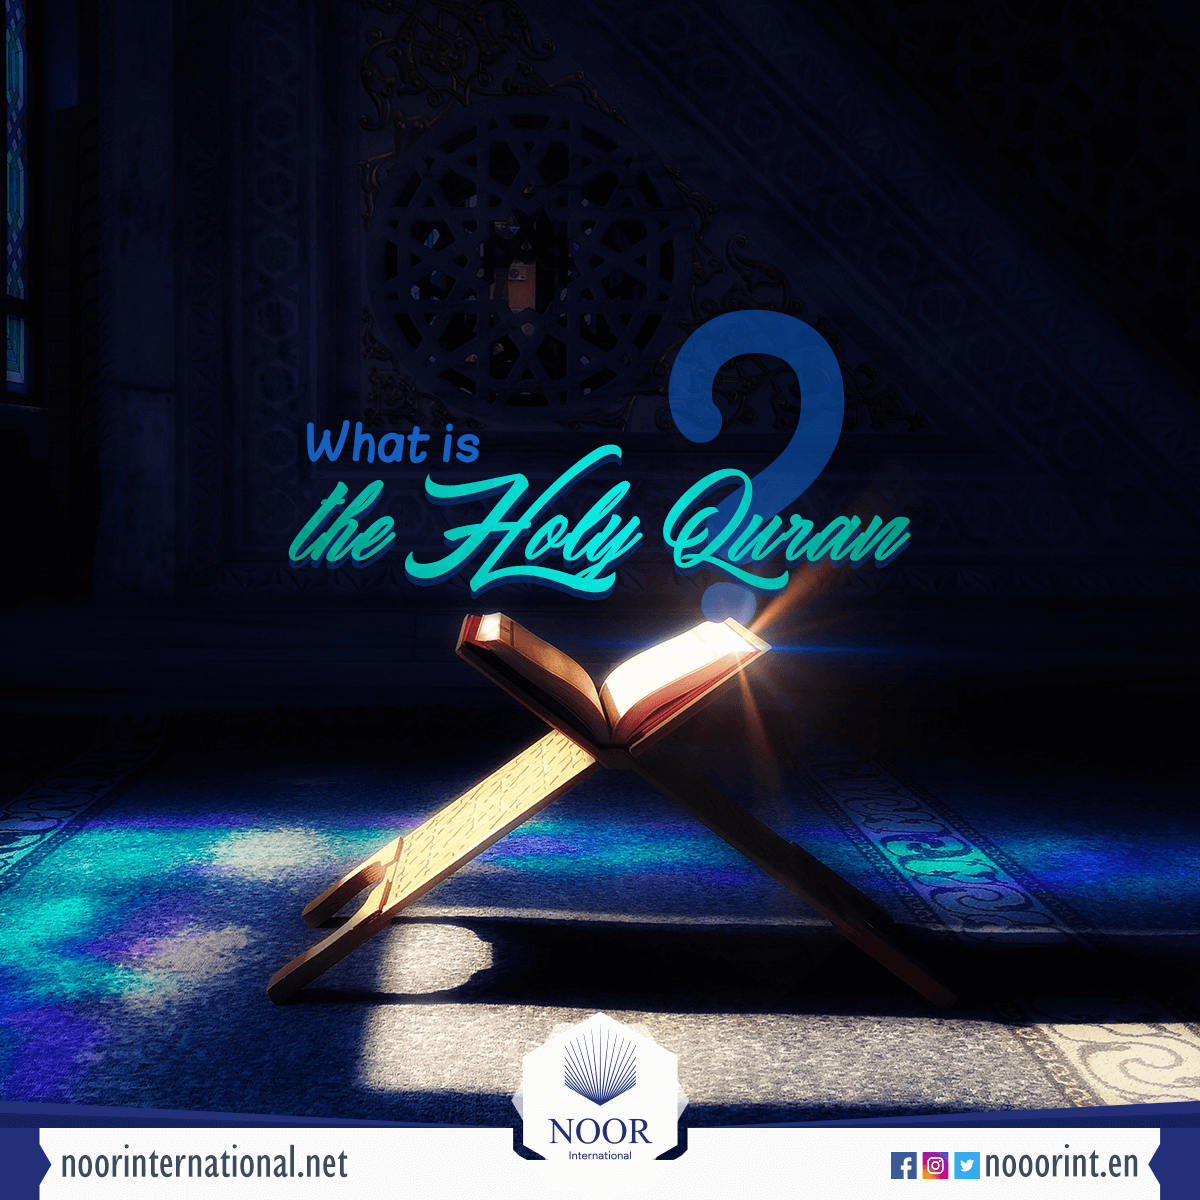 What is the Holy Quran?